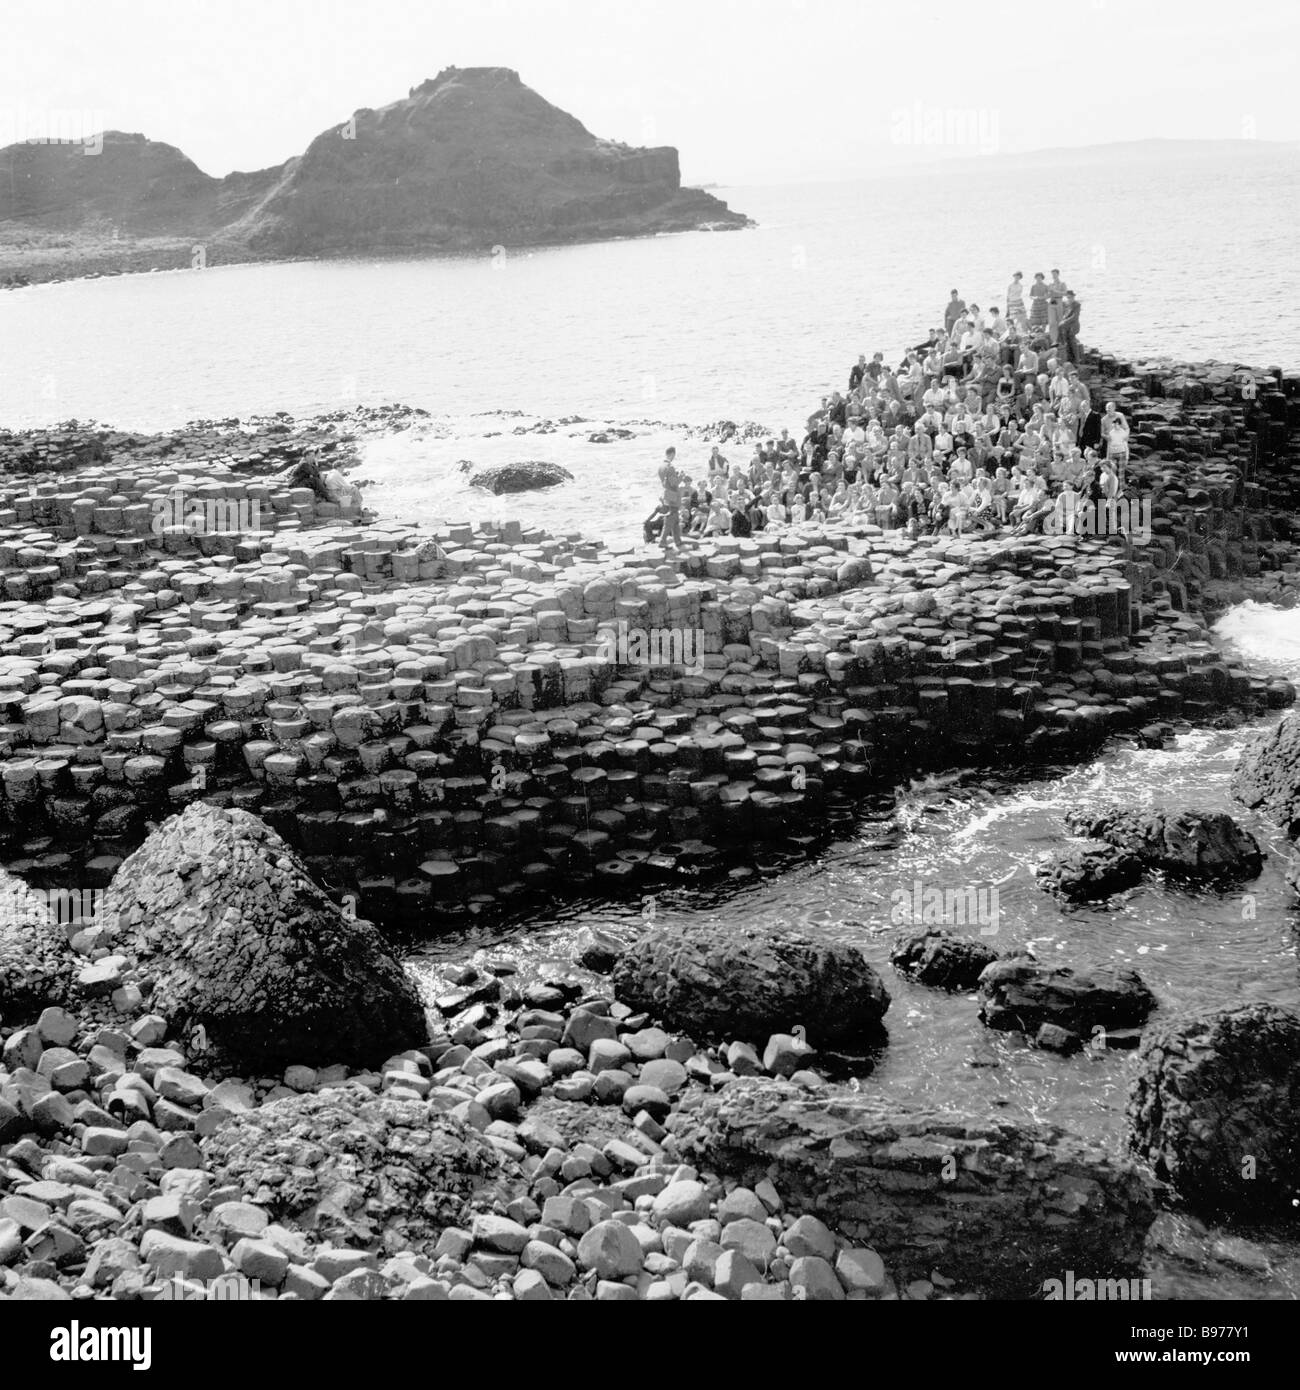 1950s, historical, group of people on the ancient rock formations, the basalt columns, at the famous Giant's Causeway, Co. Antrim, Northern Ireland. Stock Photo